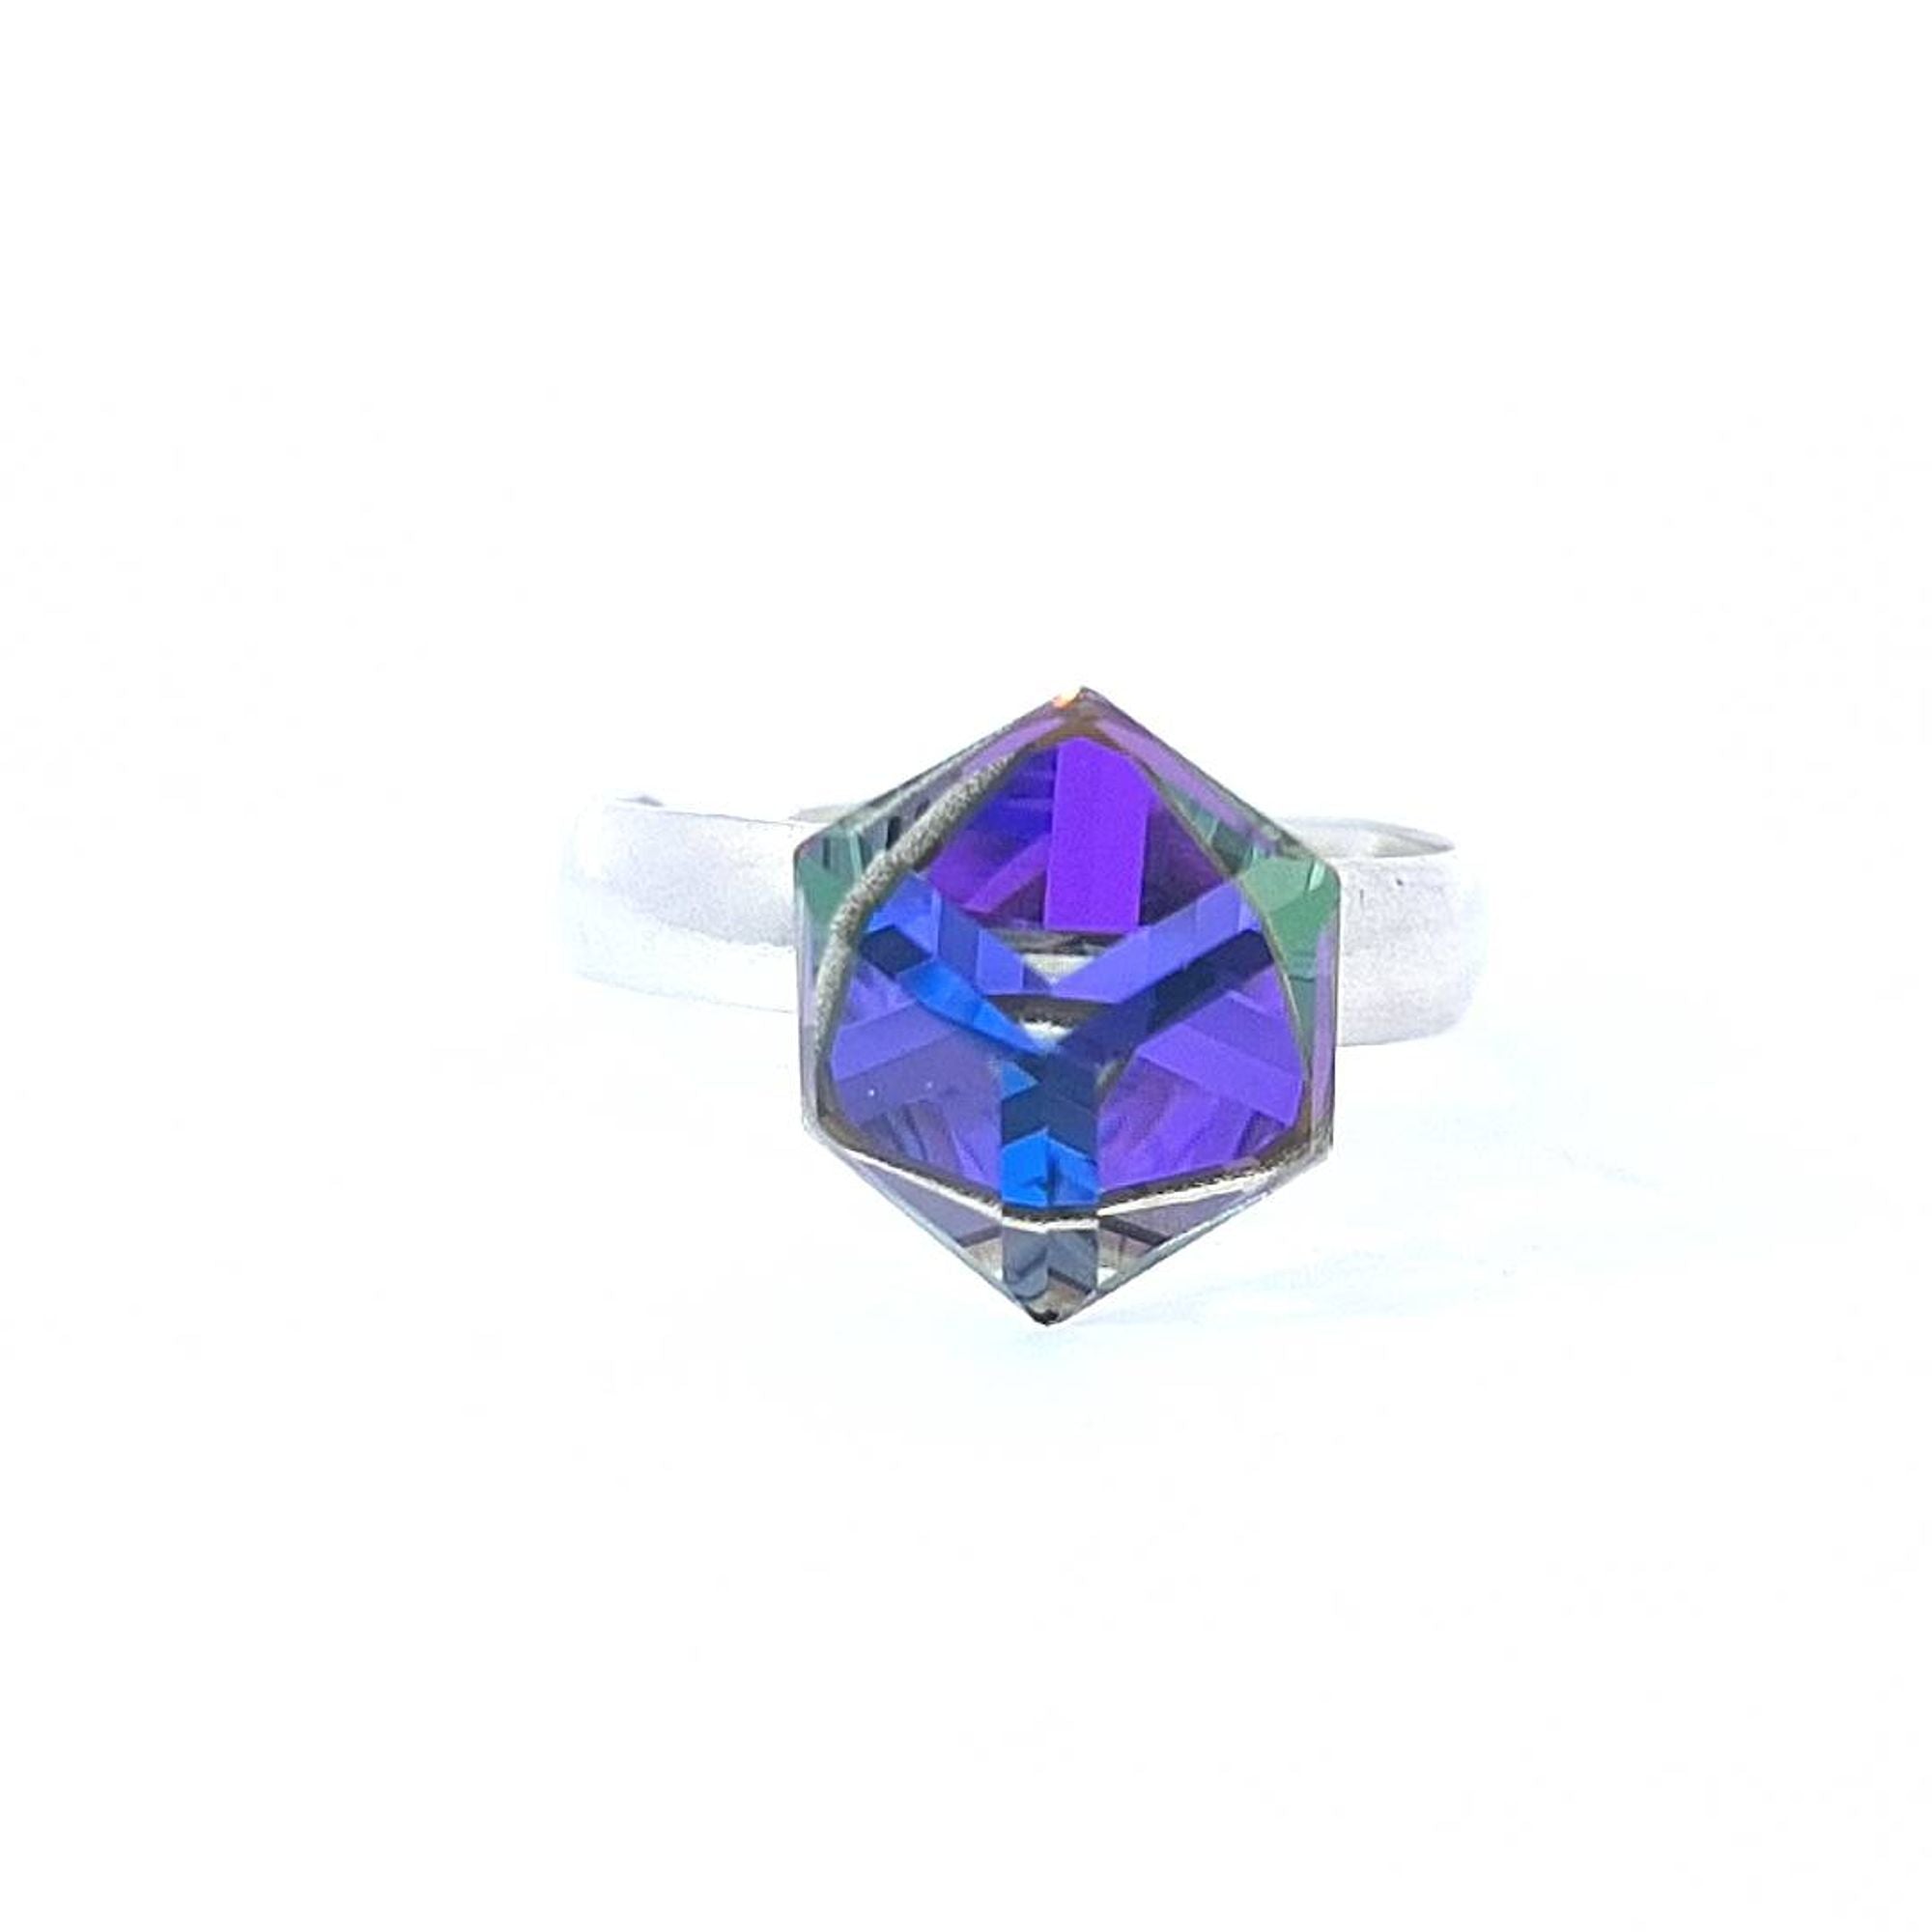 Magpie Gems' GeoGlimmer Cube Ring Featuring a Mystical Heliotrope Purple Crystal